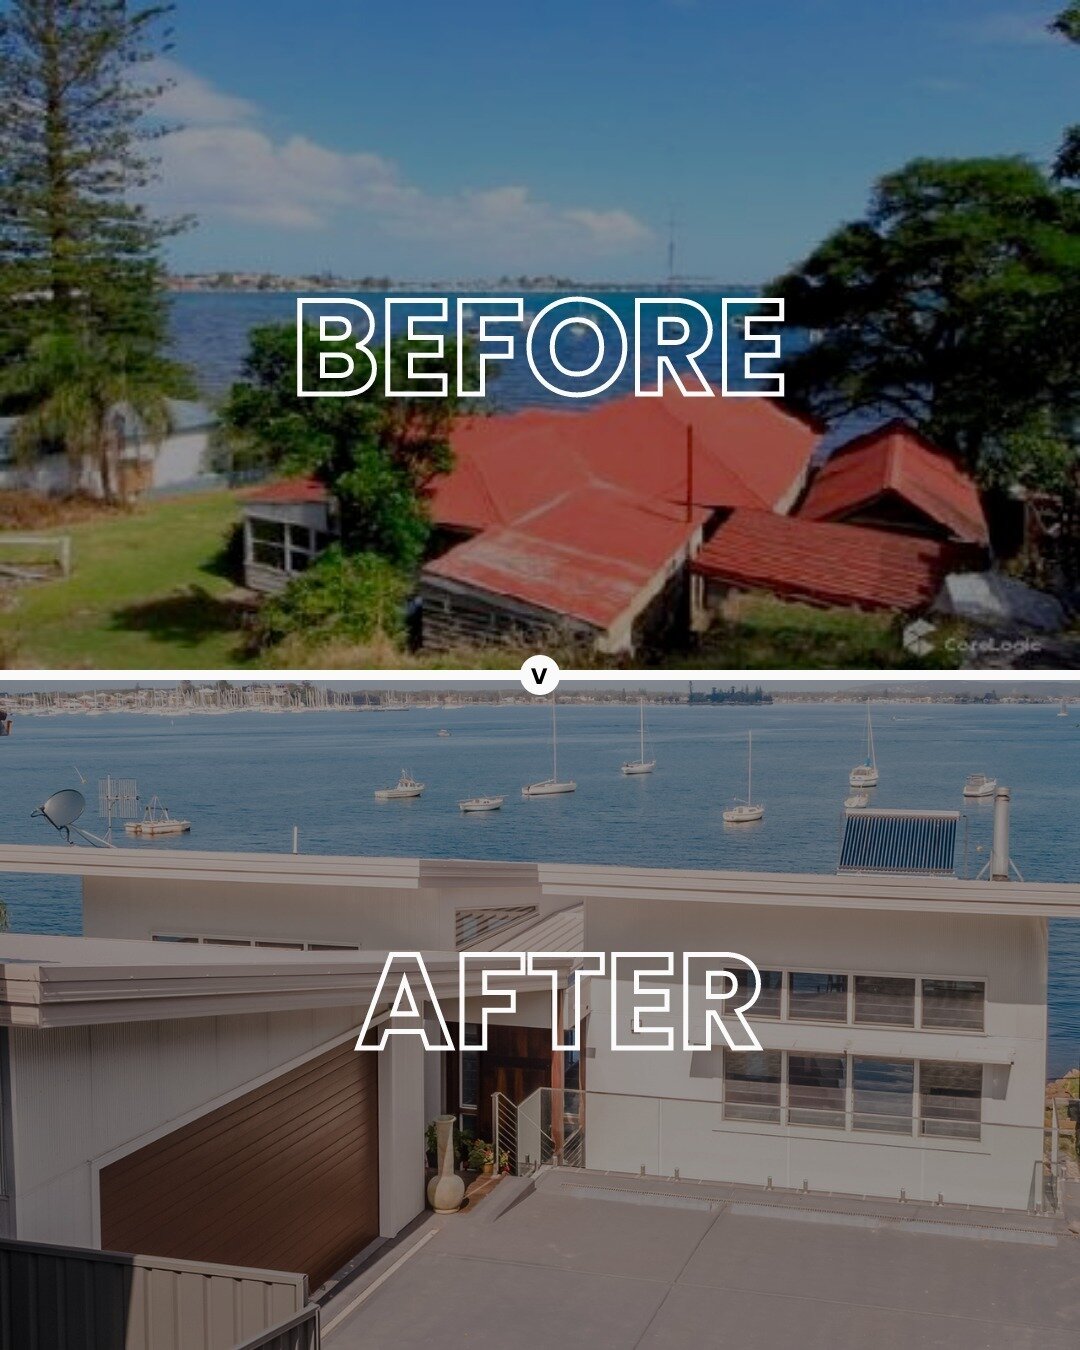 Features and angles done right 🙌 

Check out our Ross Street Build&rsquo;s amazing before and after transformation. It comes with breathtaking views of Lake Macquarie. Located right on the water's edge, this stunning residence was built with utmost 